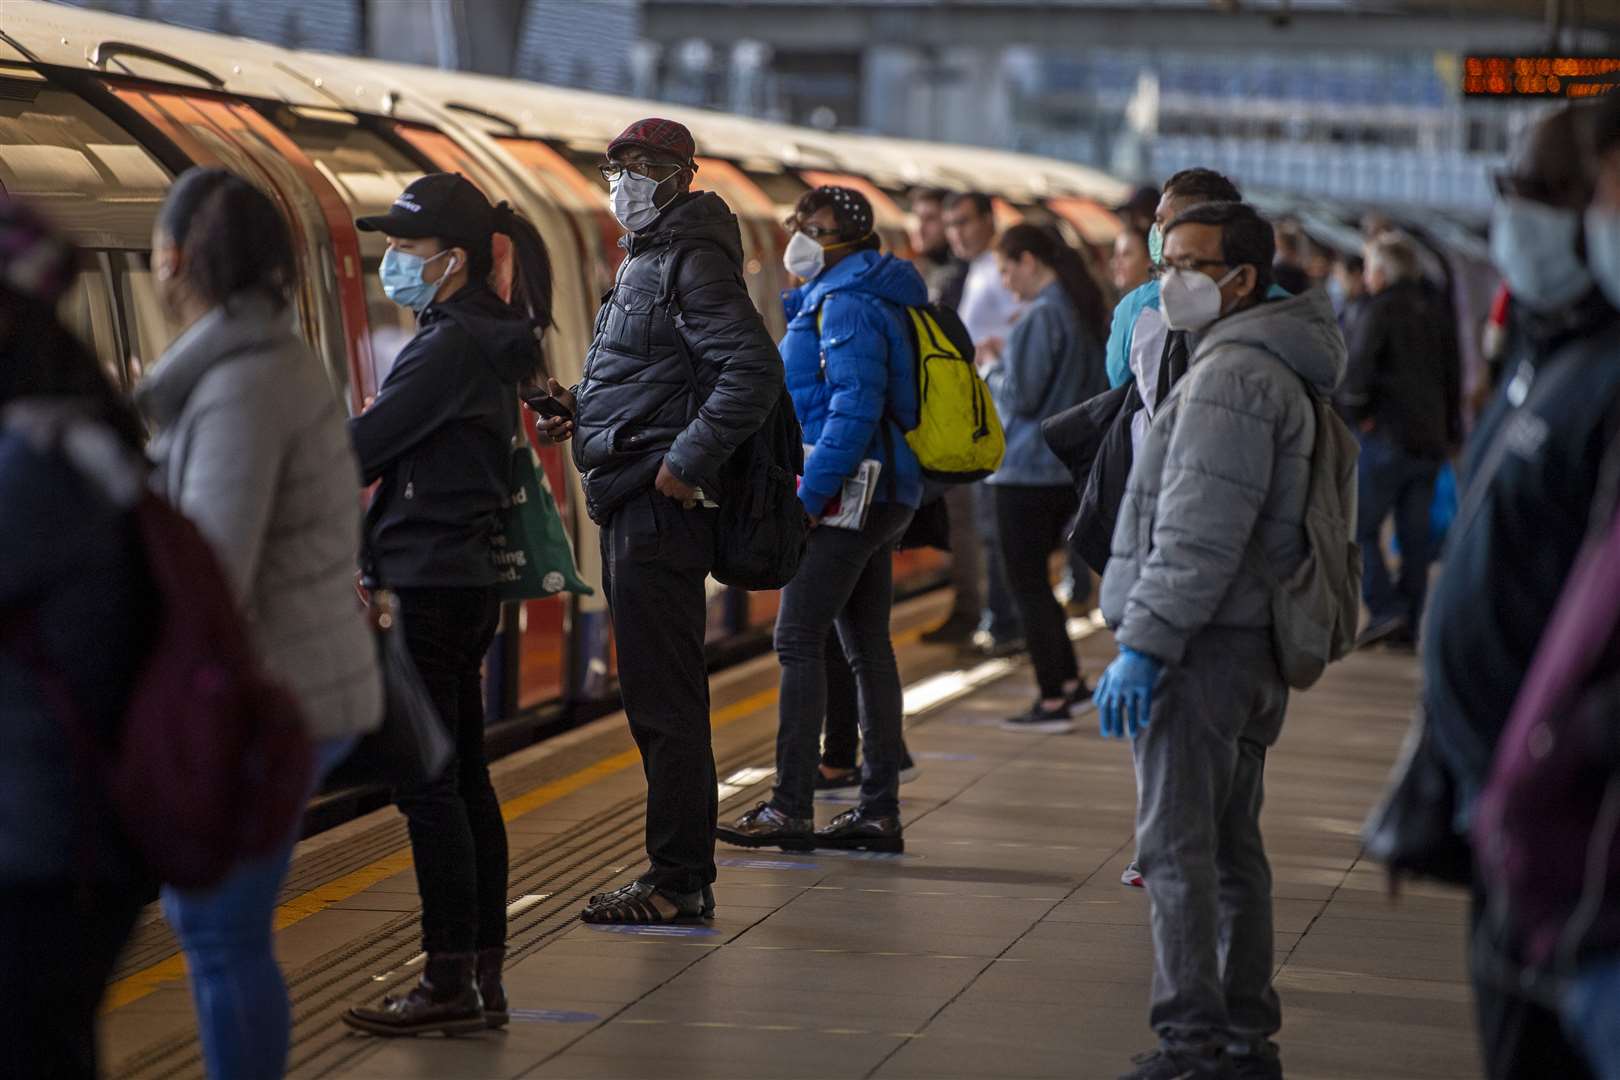 Passengers wearing face masks on a platform at Canning Town underground station in London (Victoria Jones/PA Wire)